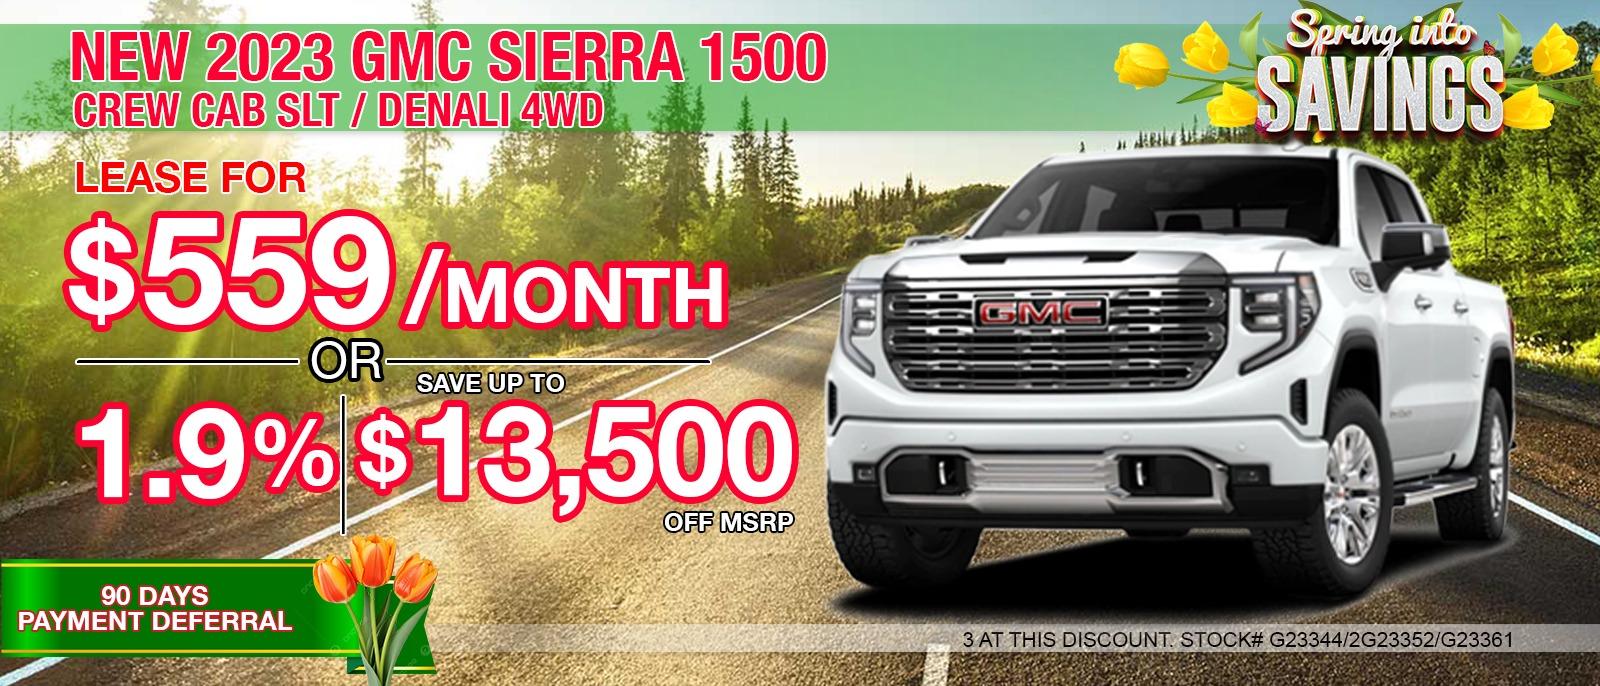 2023 GMC SIERRA 1500 CREW CAB DENALI / SLT / SLE. Your Net Savings After All Offers save up to $13,500